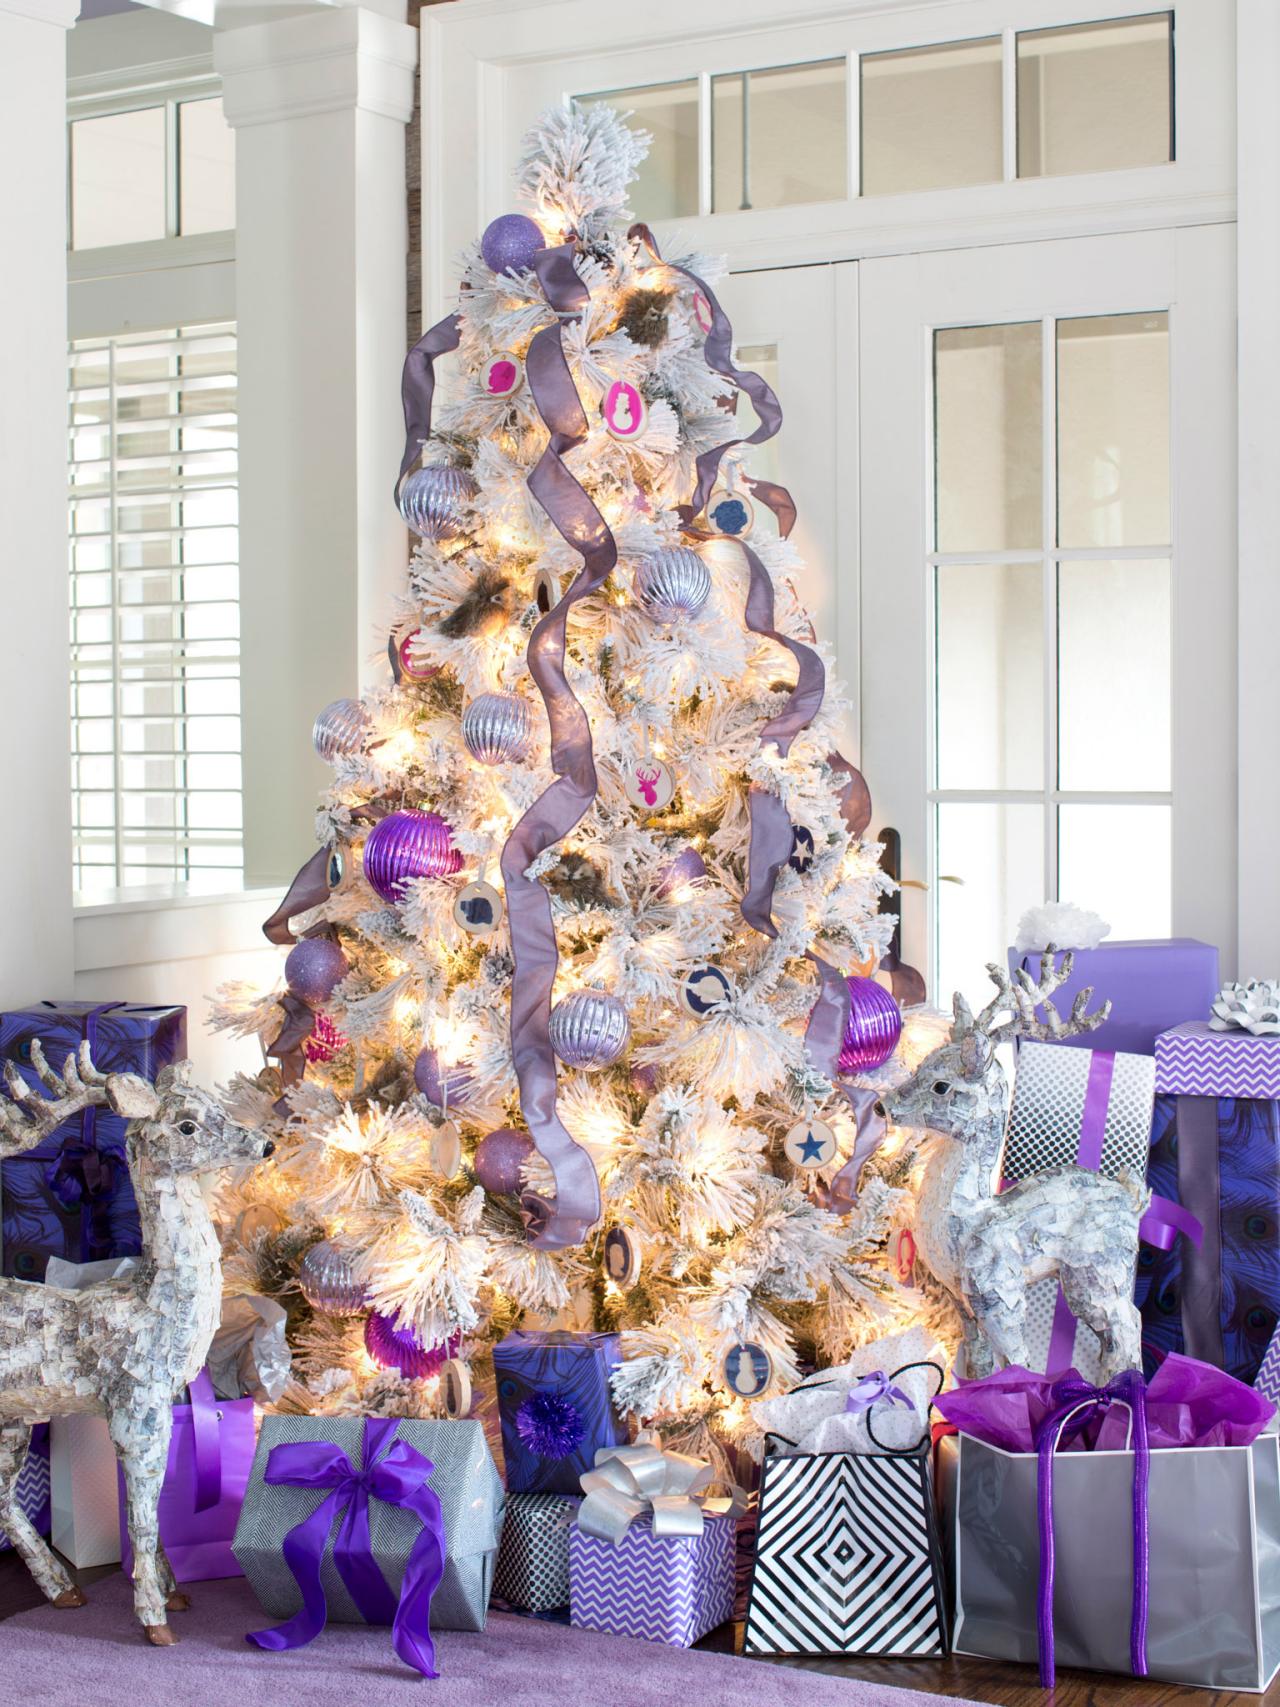 Non-Traditional Holiday Color Palettes | HGTV's Decorating ...